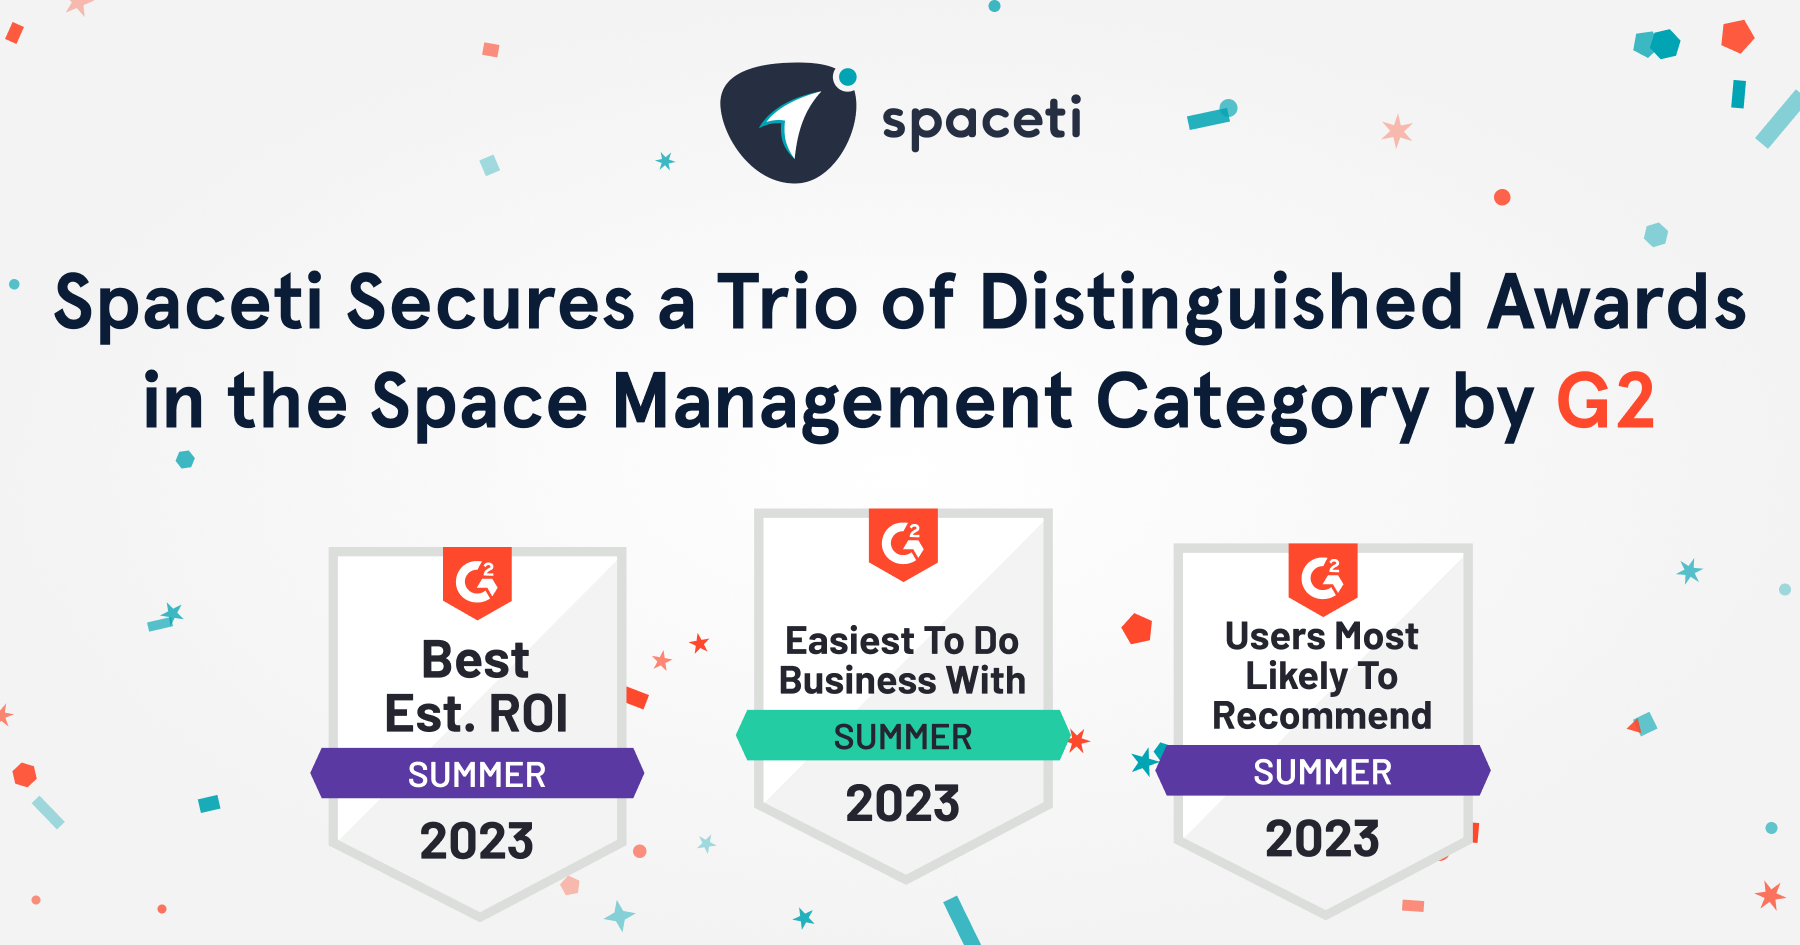 Spaceti Secures a Trio of Distinguished Awards in the Space Management Category by G2